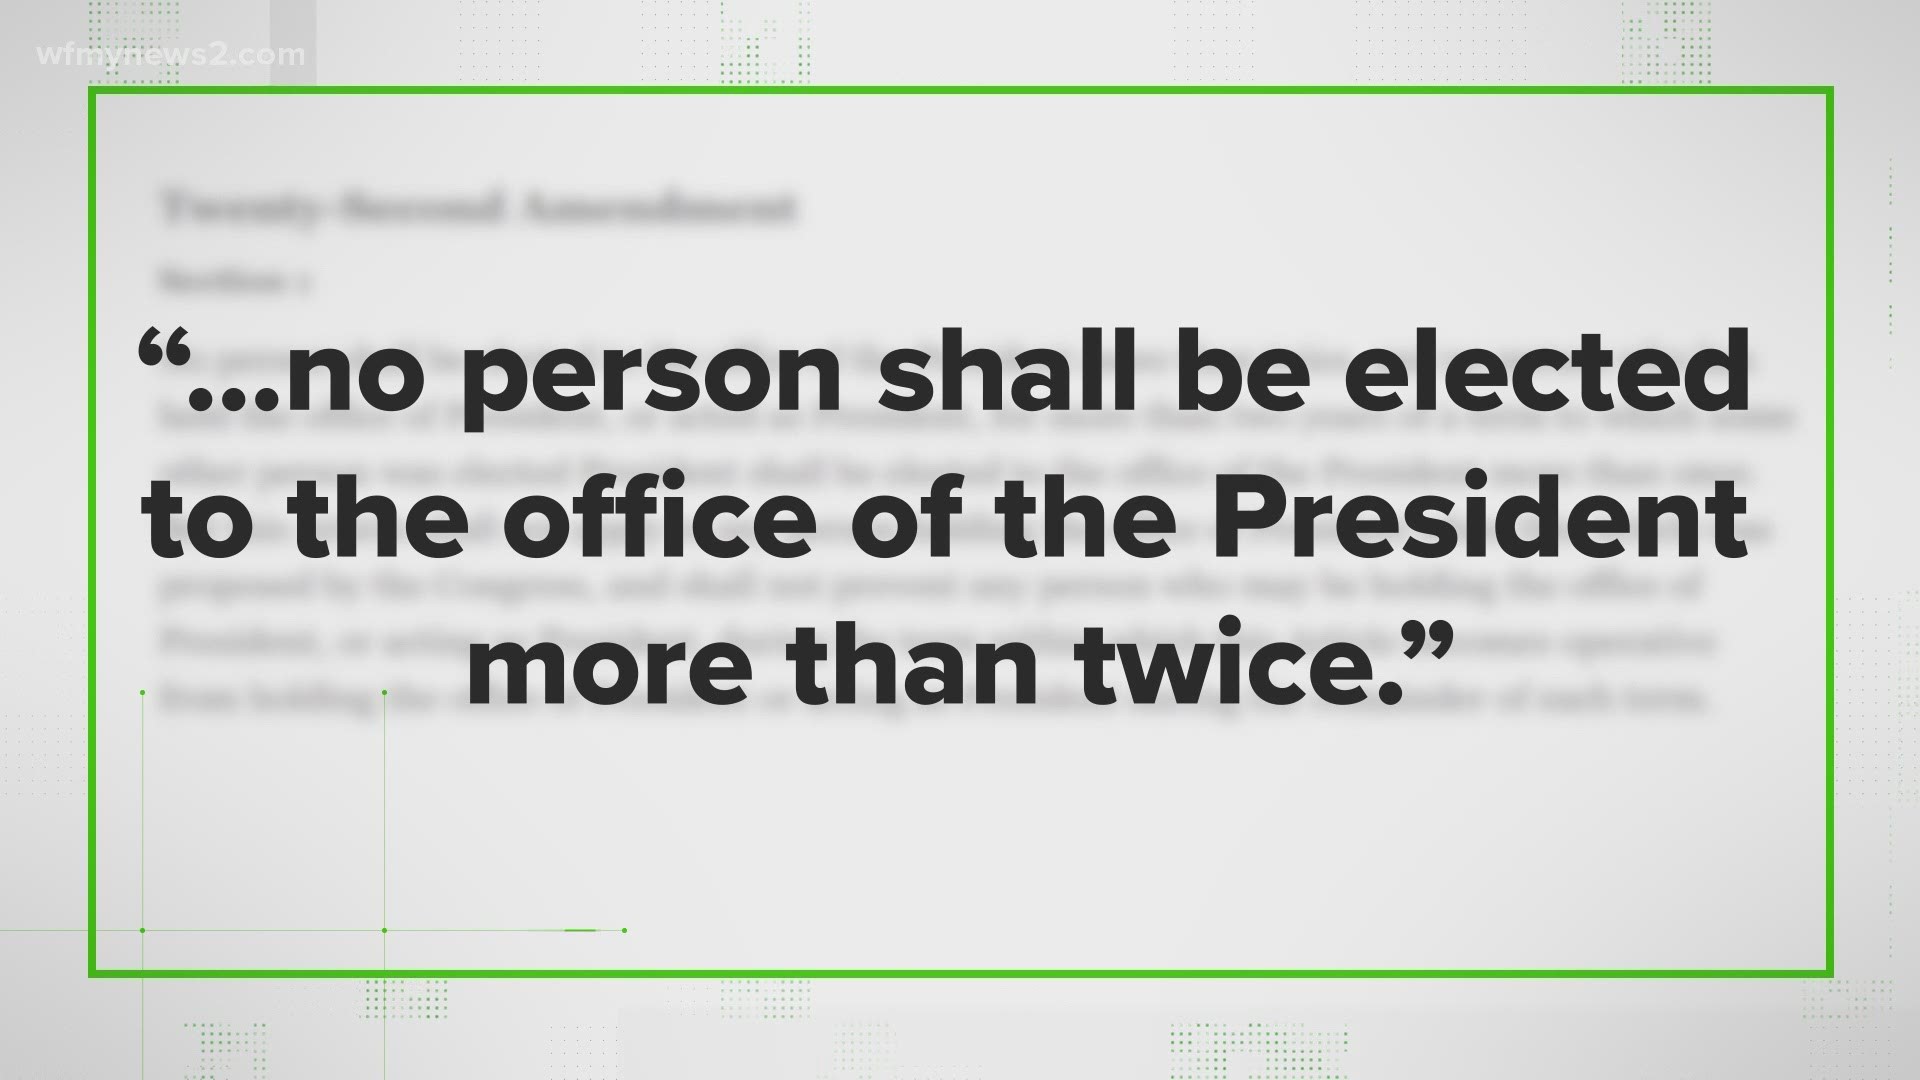 A viral claim argues that if the president loses that he'll run again in 2024. Is that true?